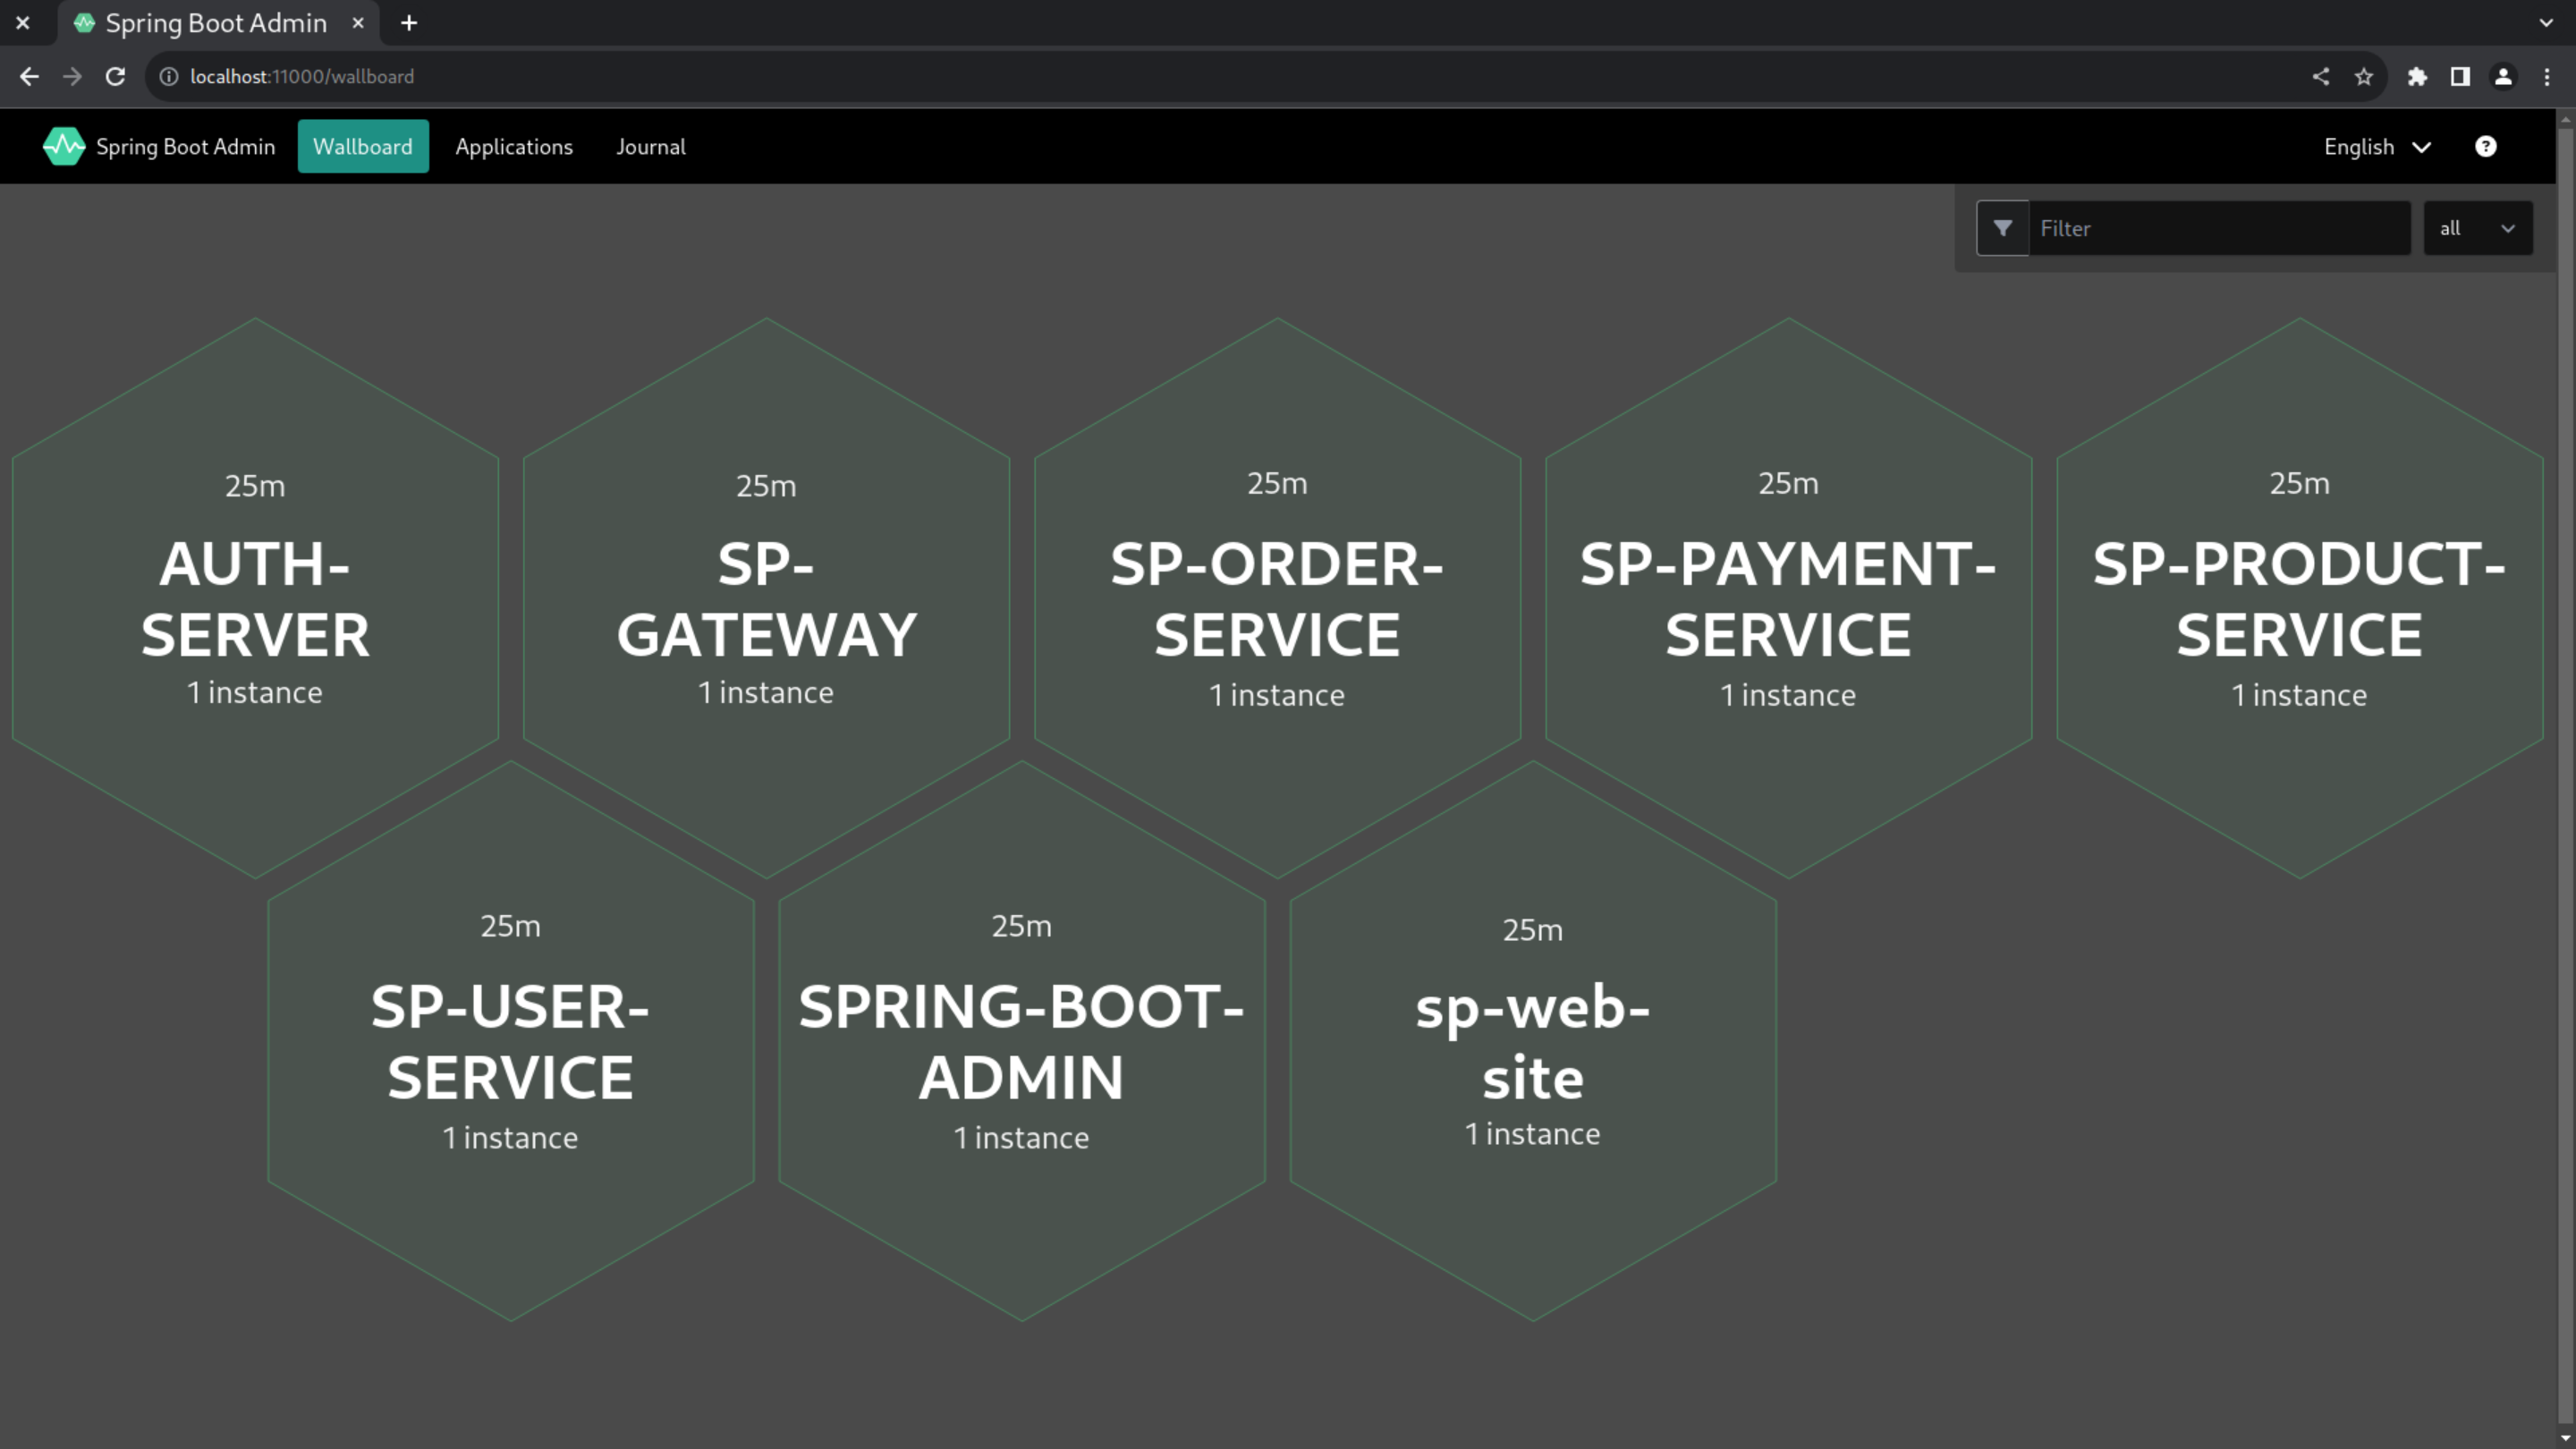 Spring Boot Admin Overview